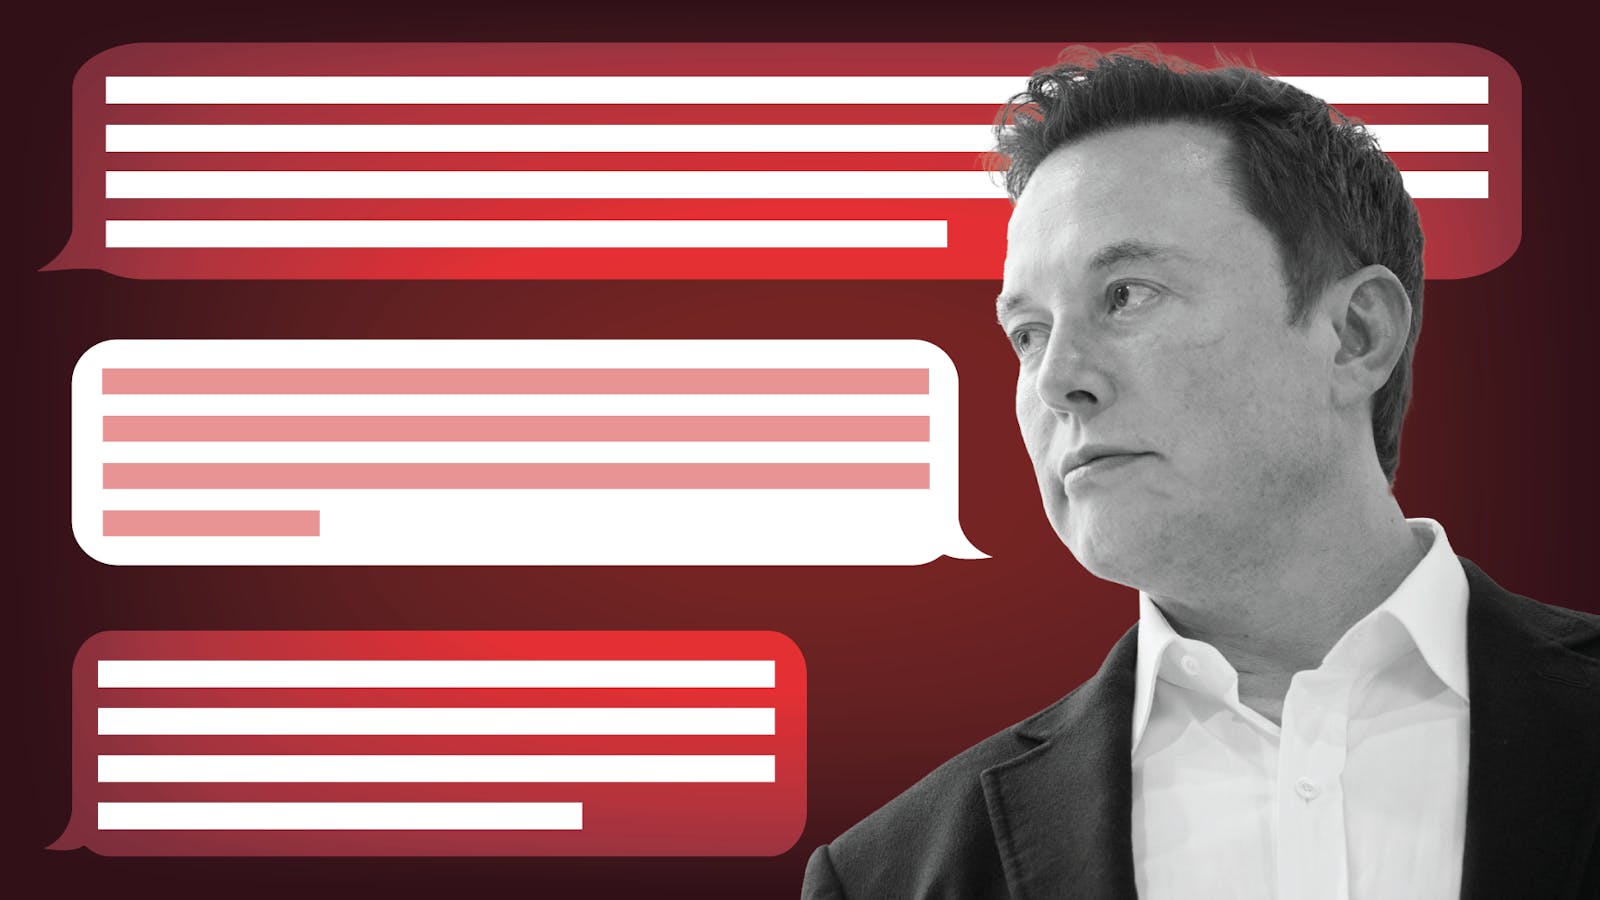 Elon Musk, Twitter and Why Online Speech Gets Moderated - Bloomberg